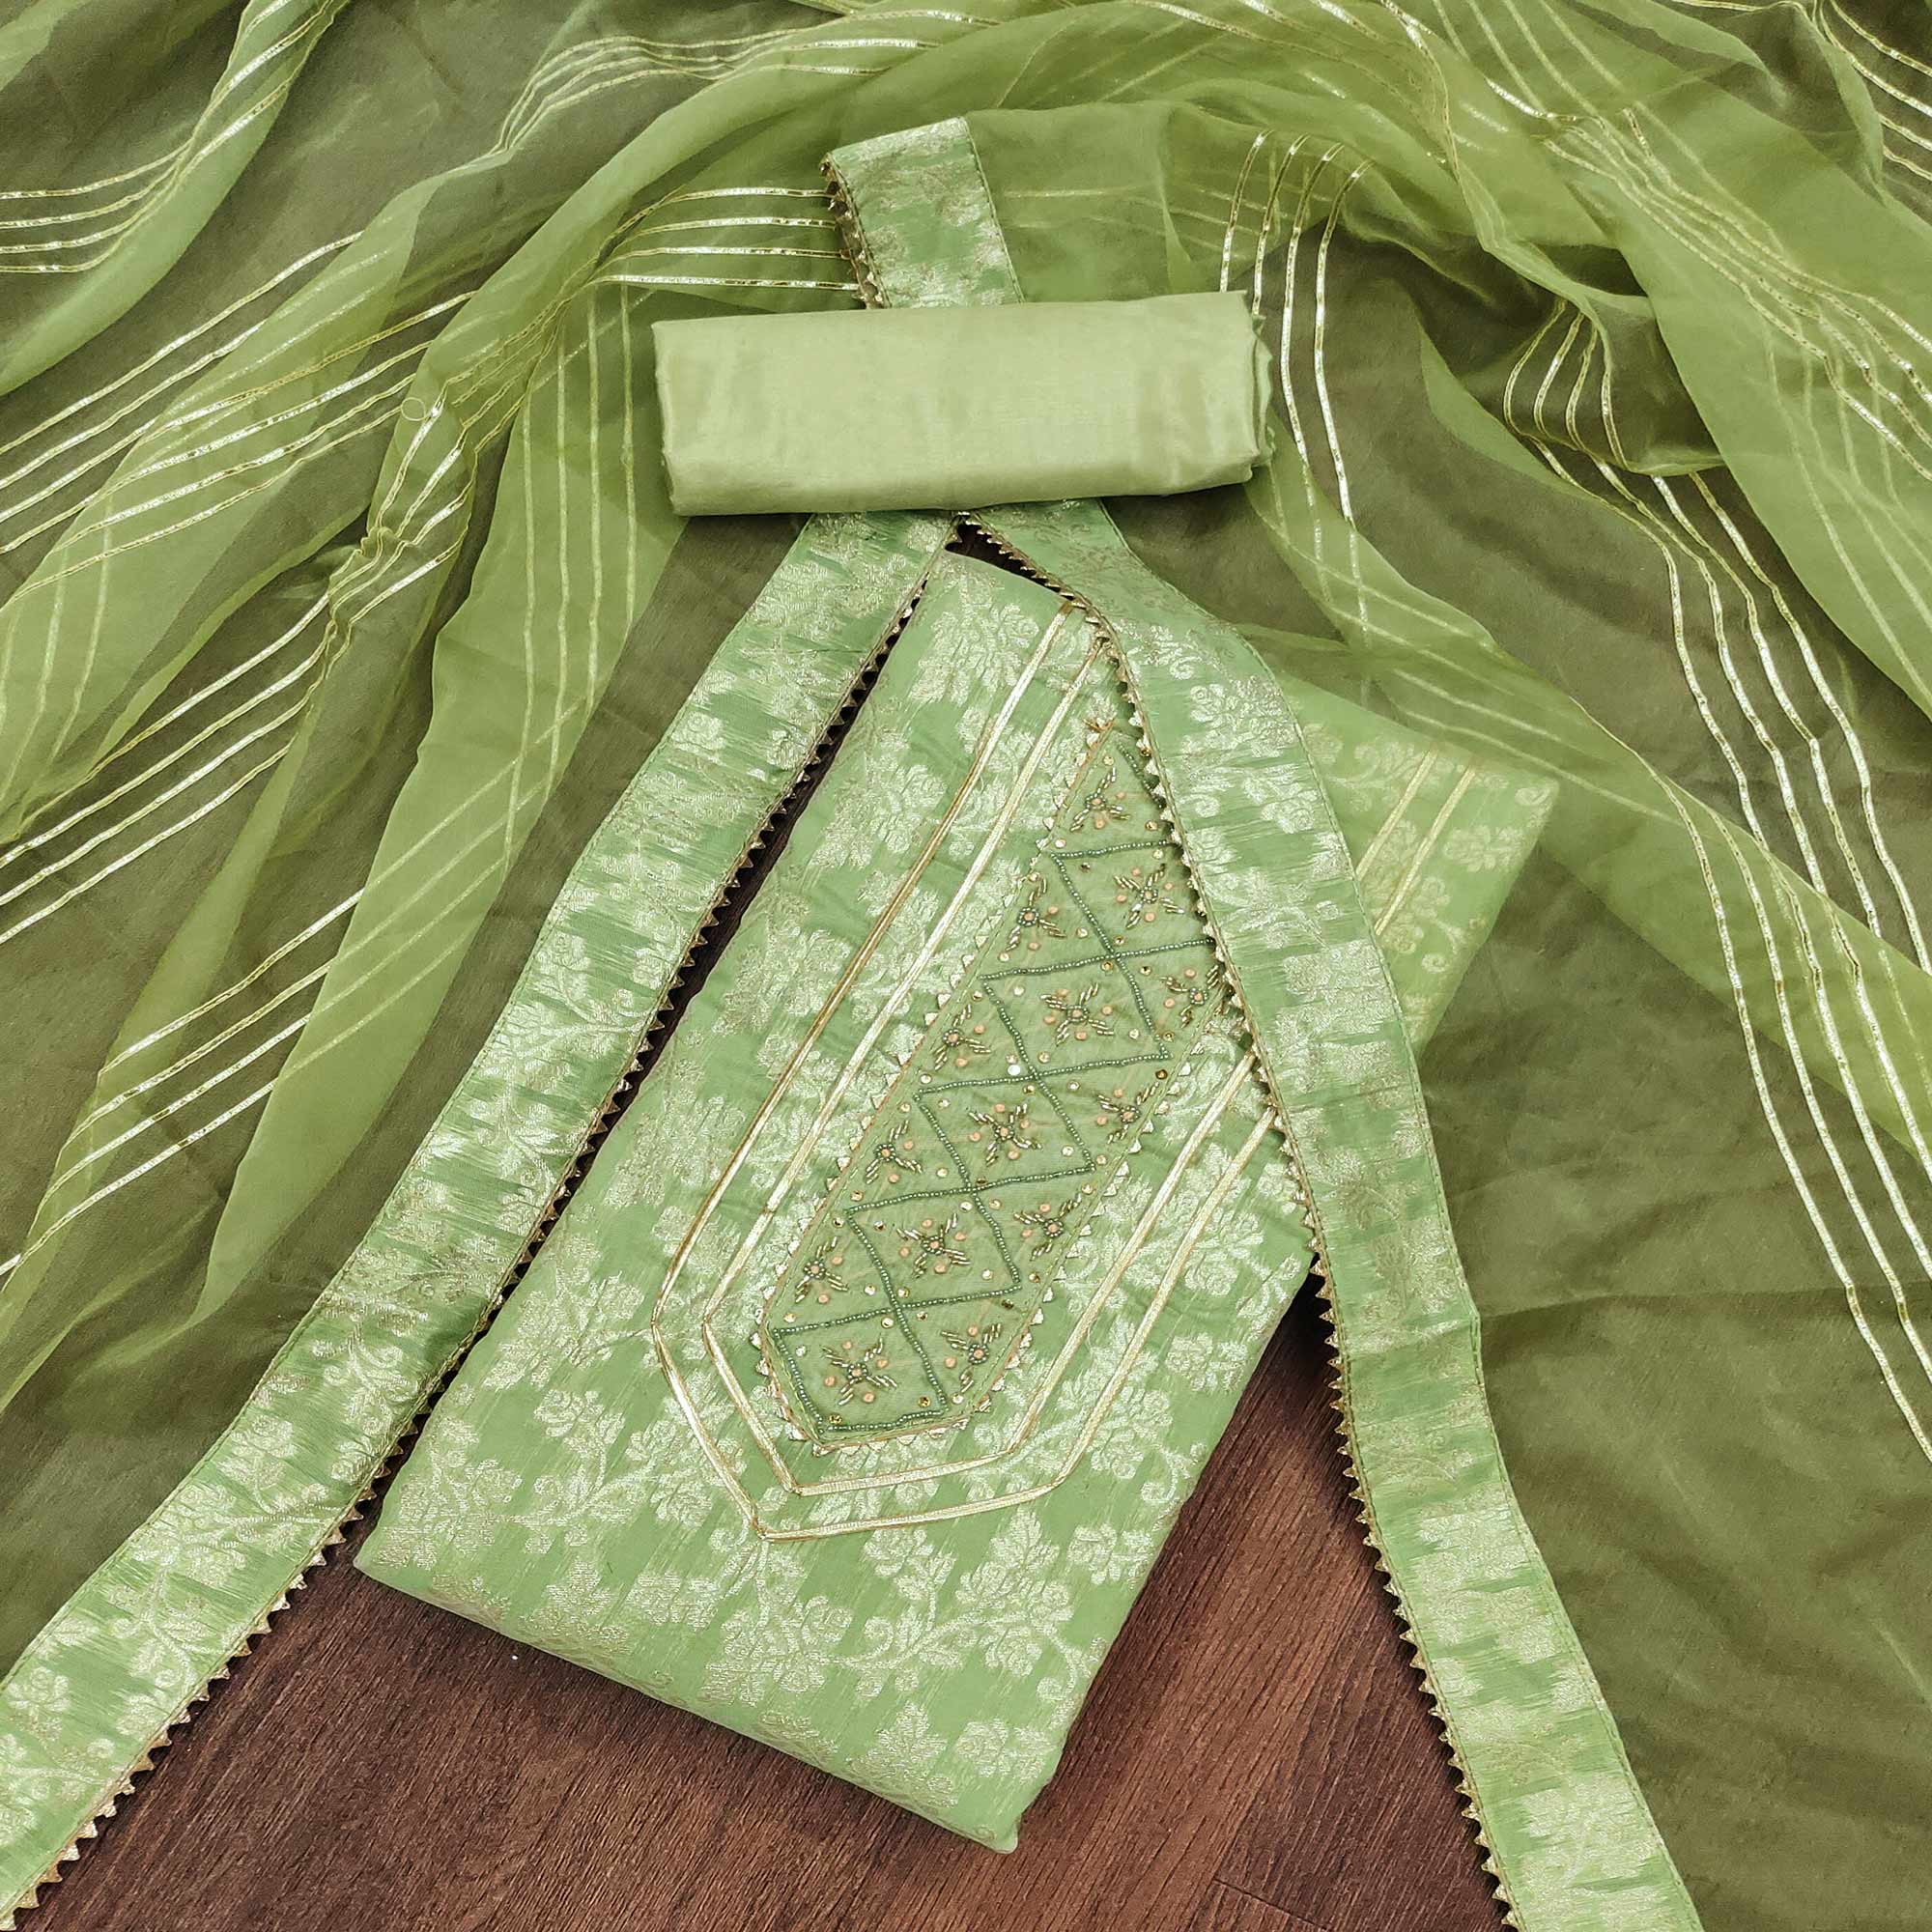 Green Woven With Handwork Jacquard Dress Material